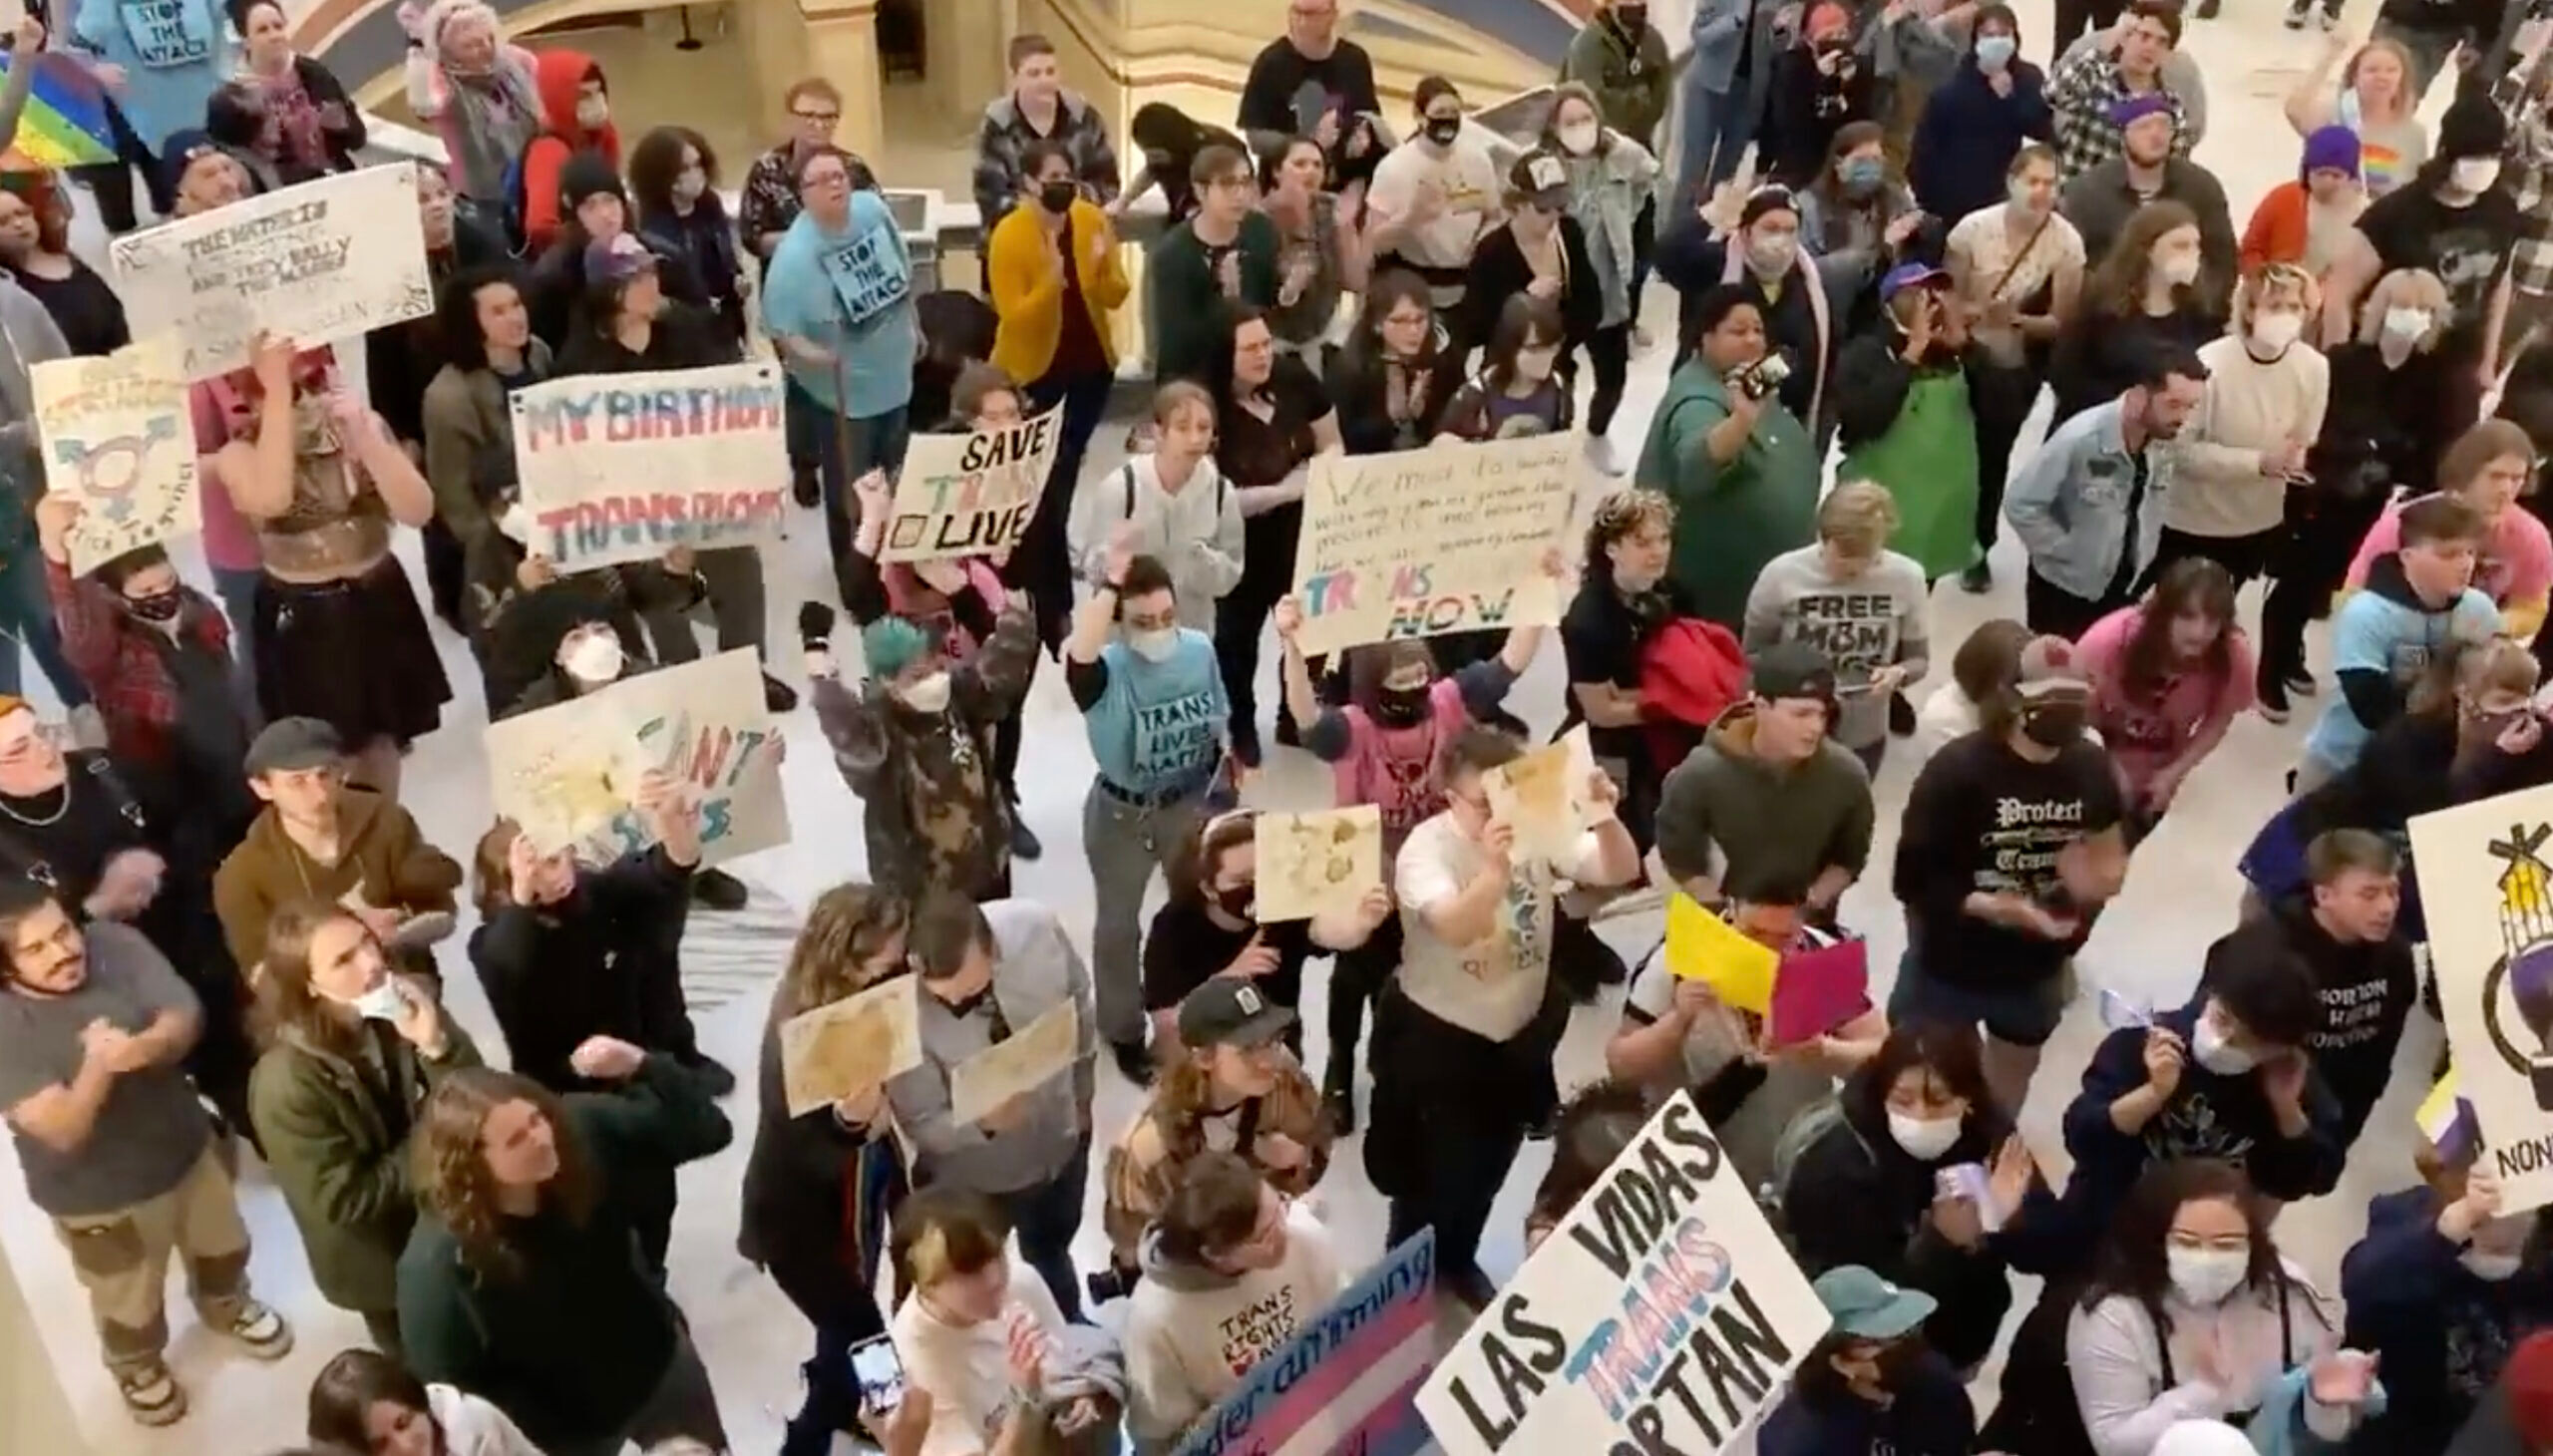 Activists took over the Oklahoma Capitol to protest anti-trans legislation